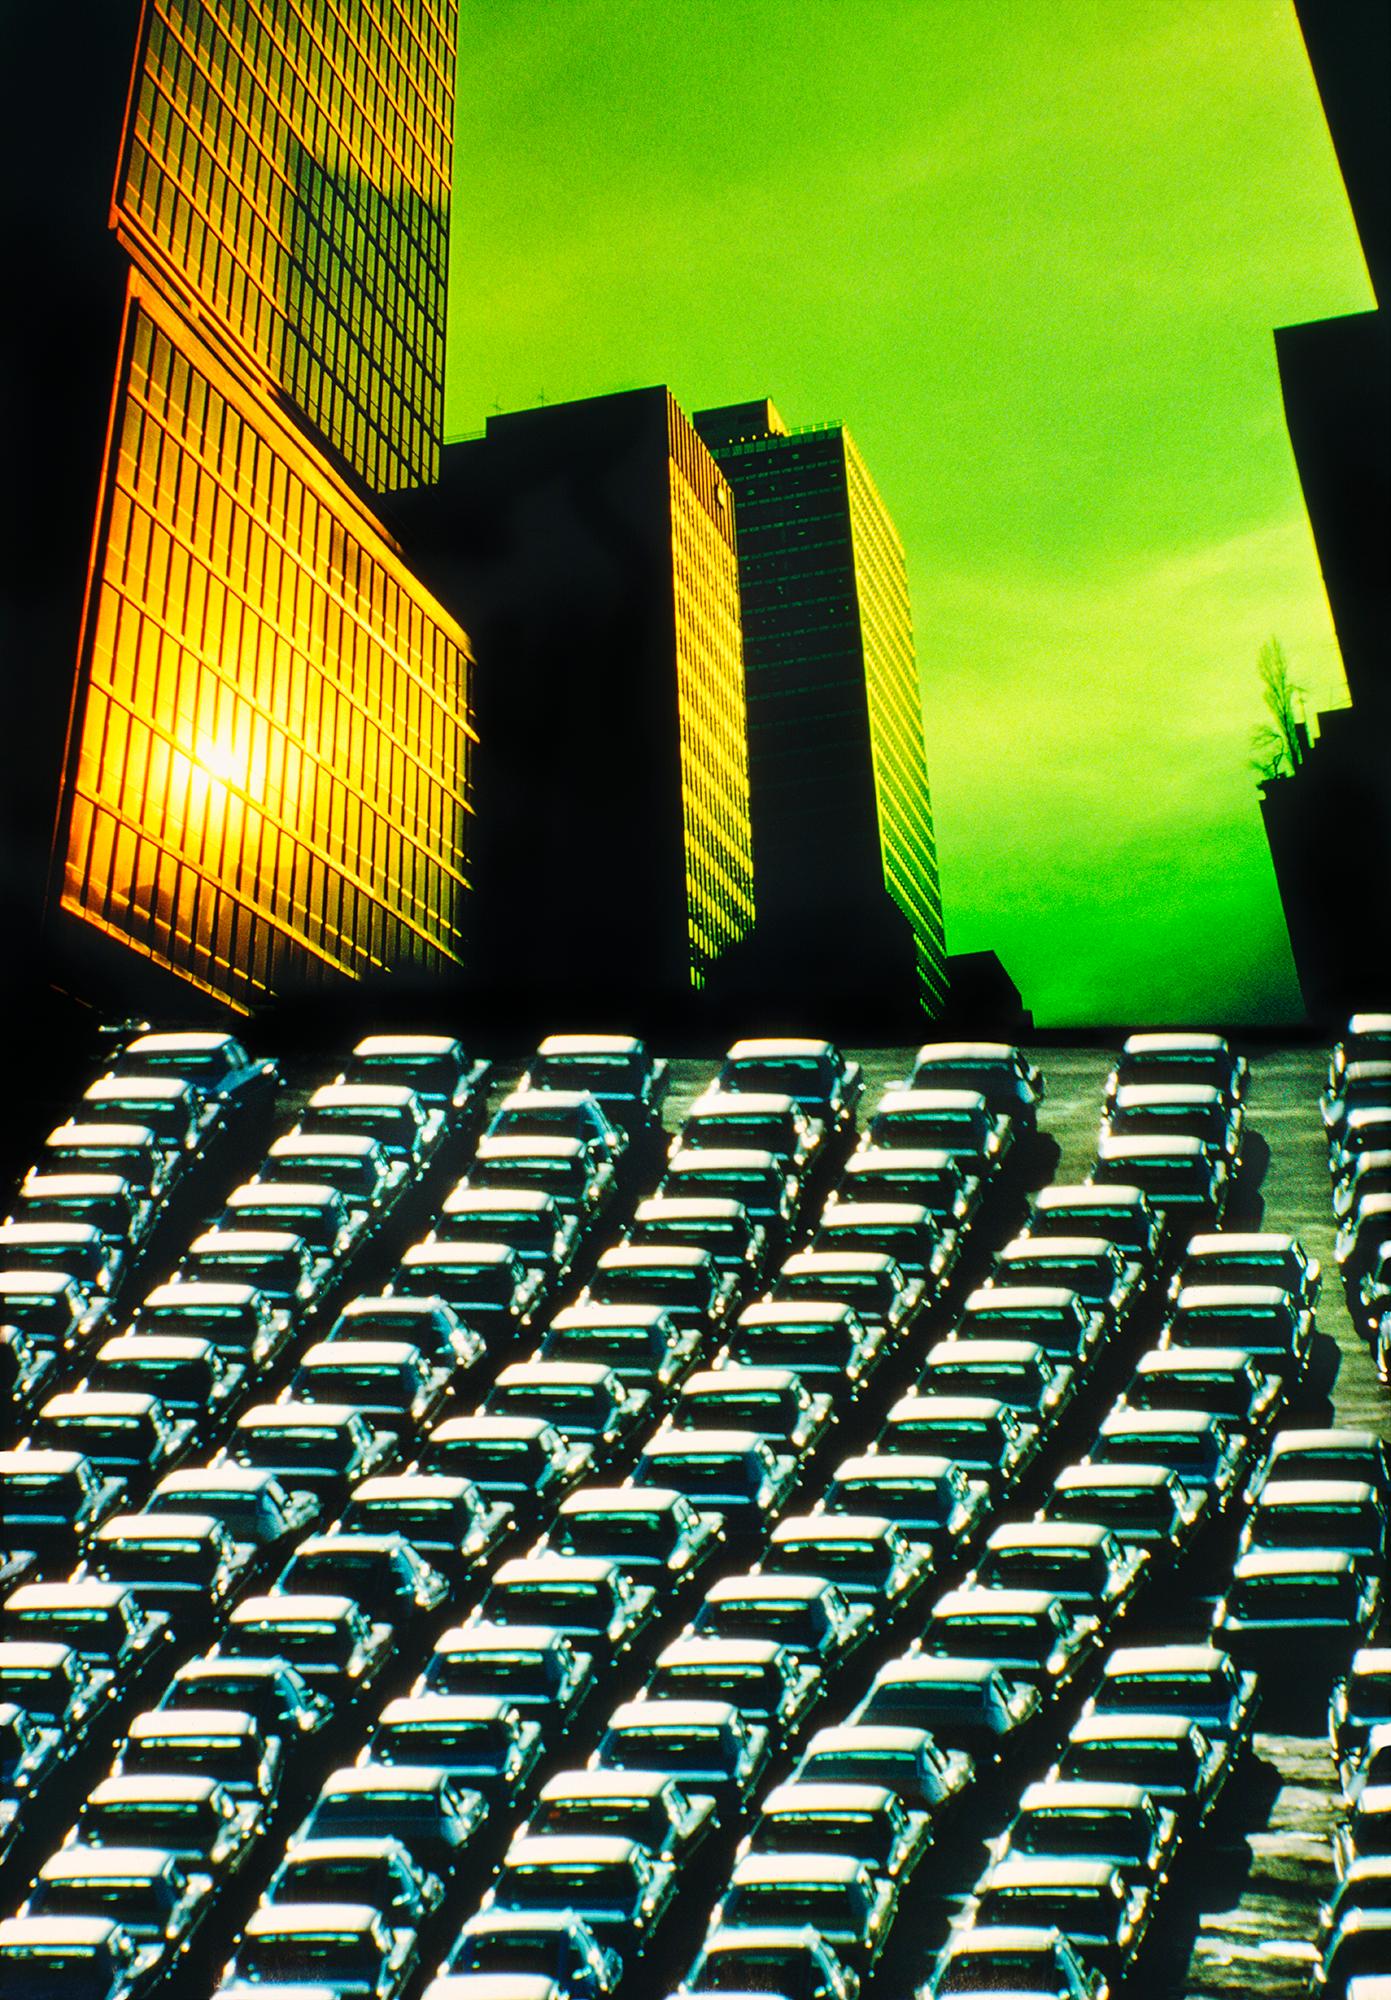 New York Skyscrapers with Green Sky and Divergent Perspective